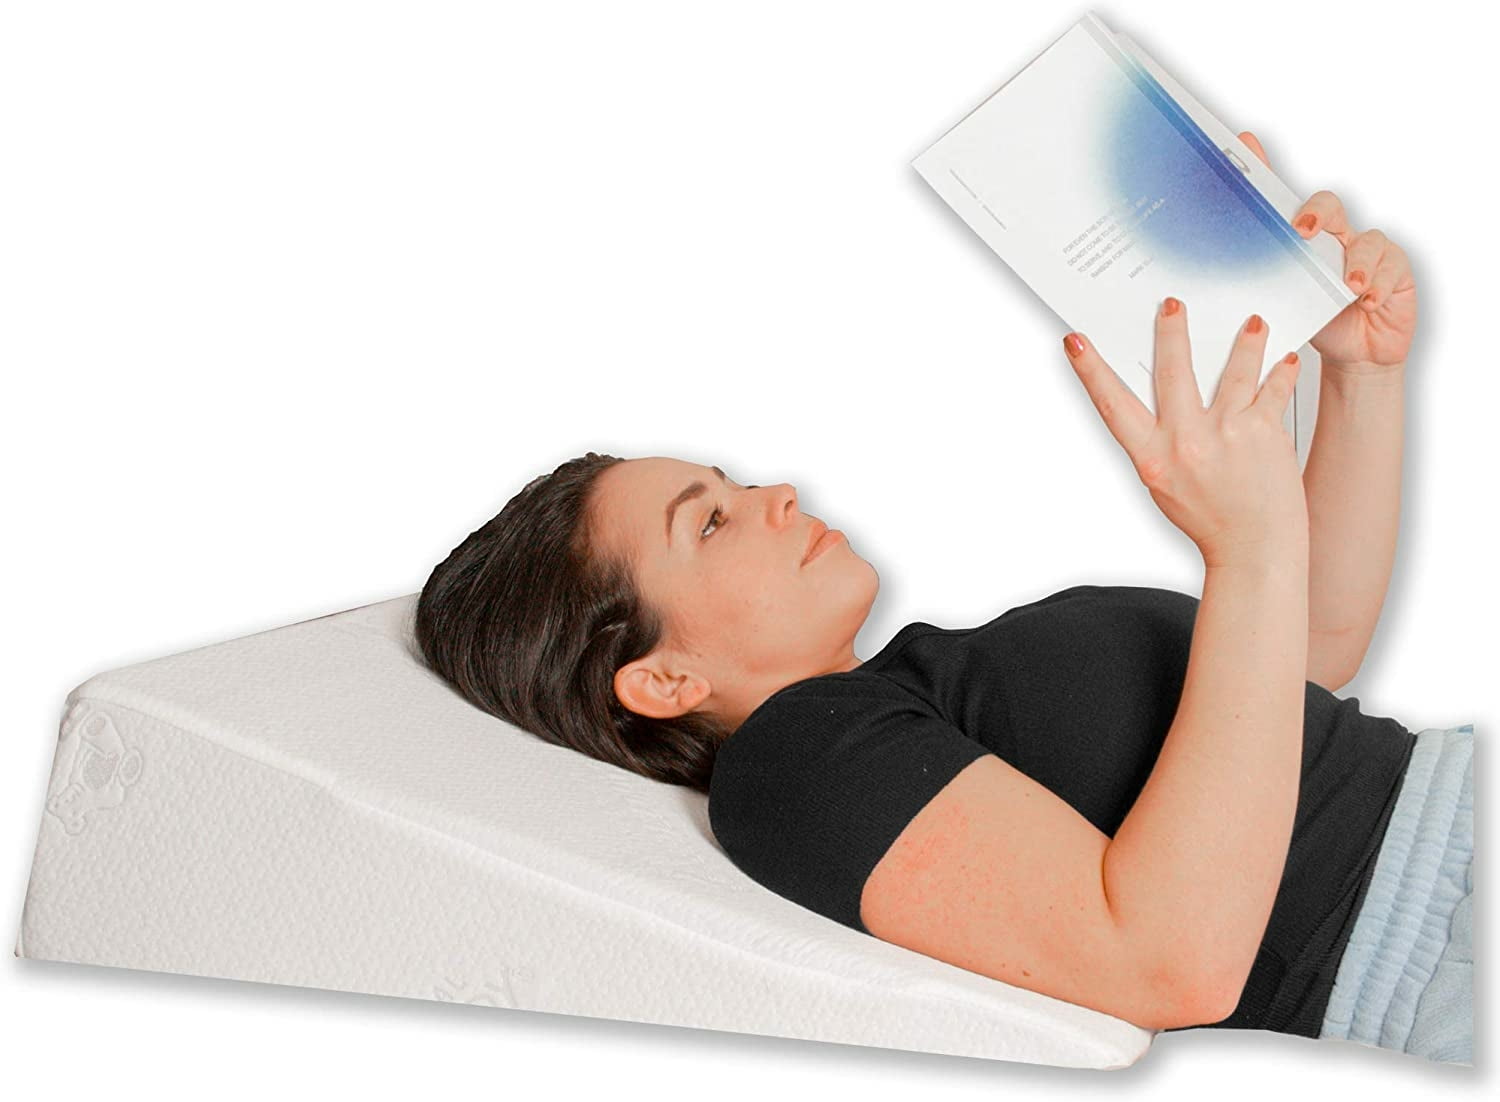 White with Blue Edge Memory Foam Leg Pillow with Polyester Cover Bedding Gift 